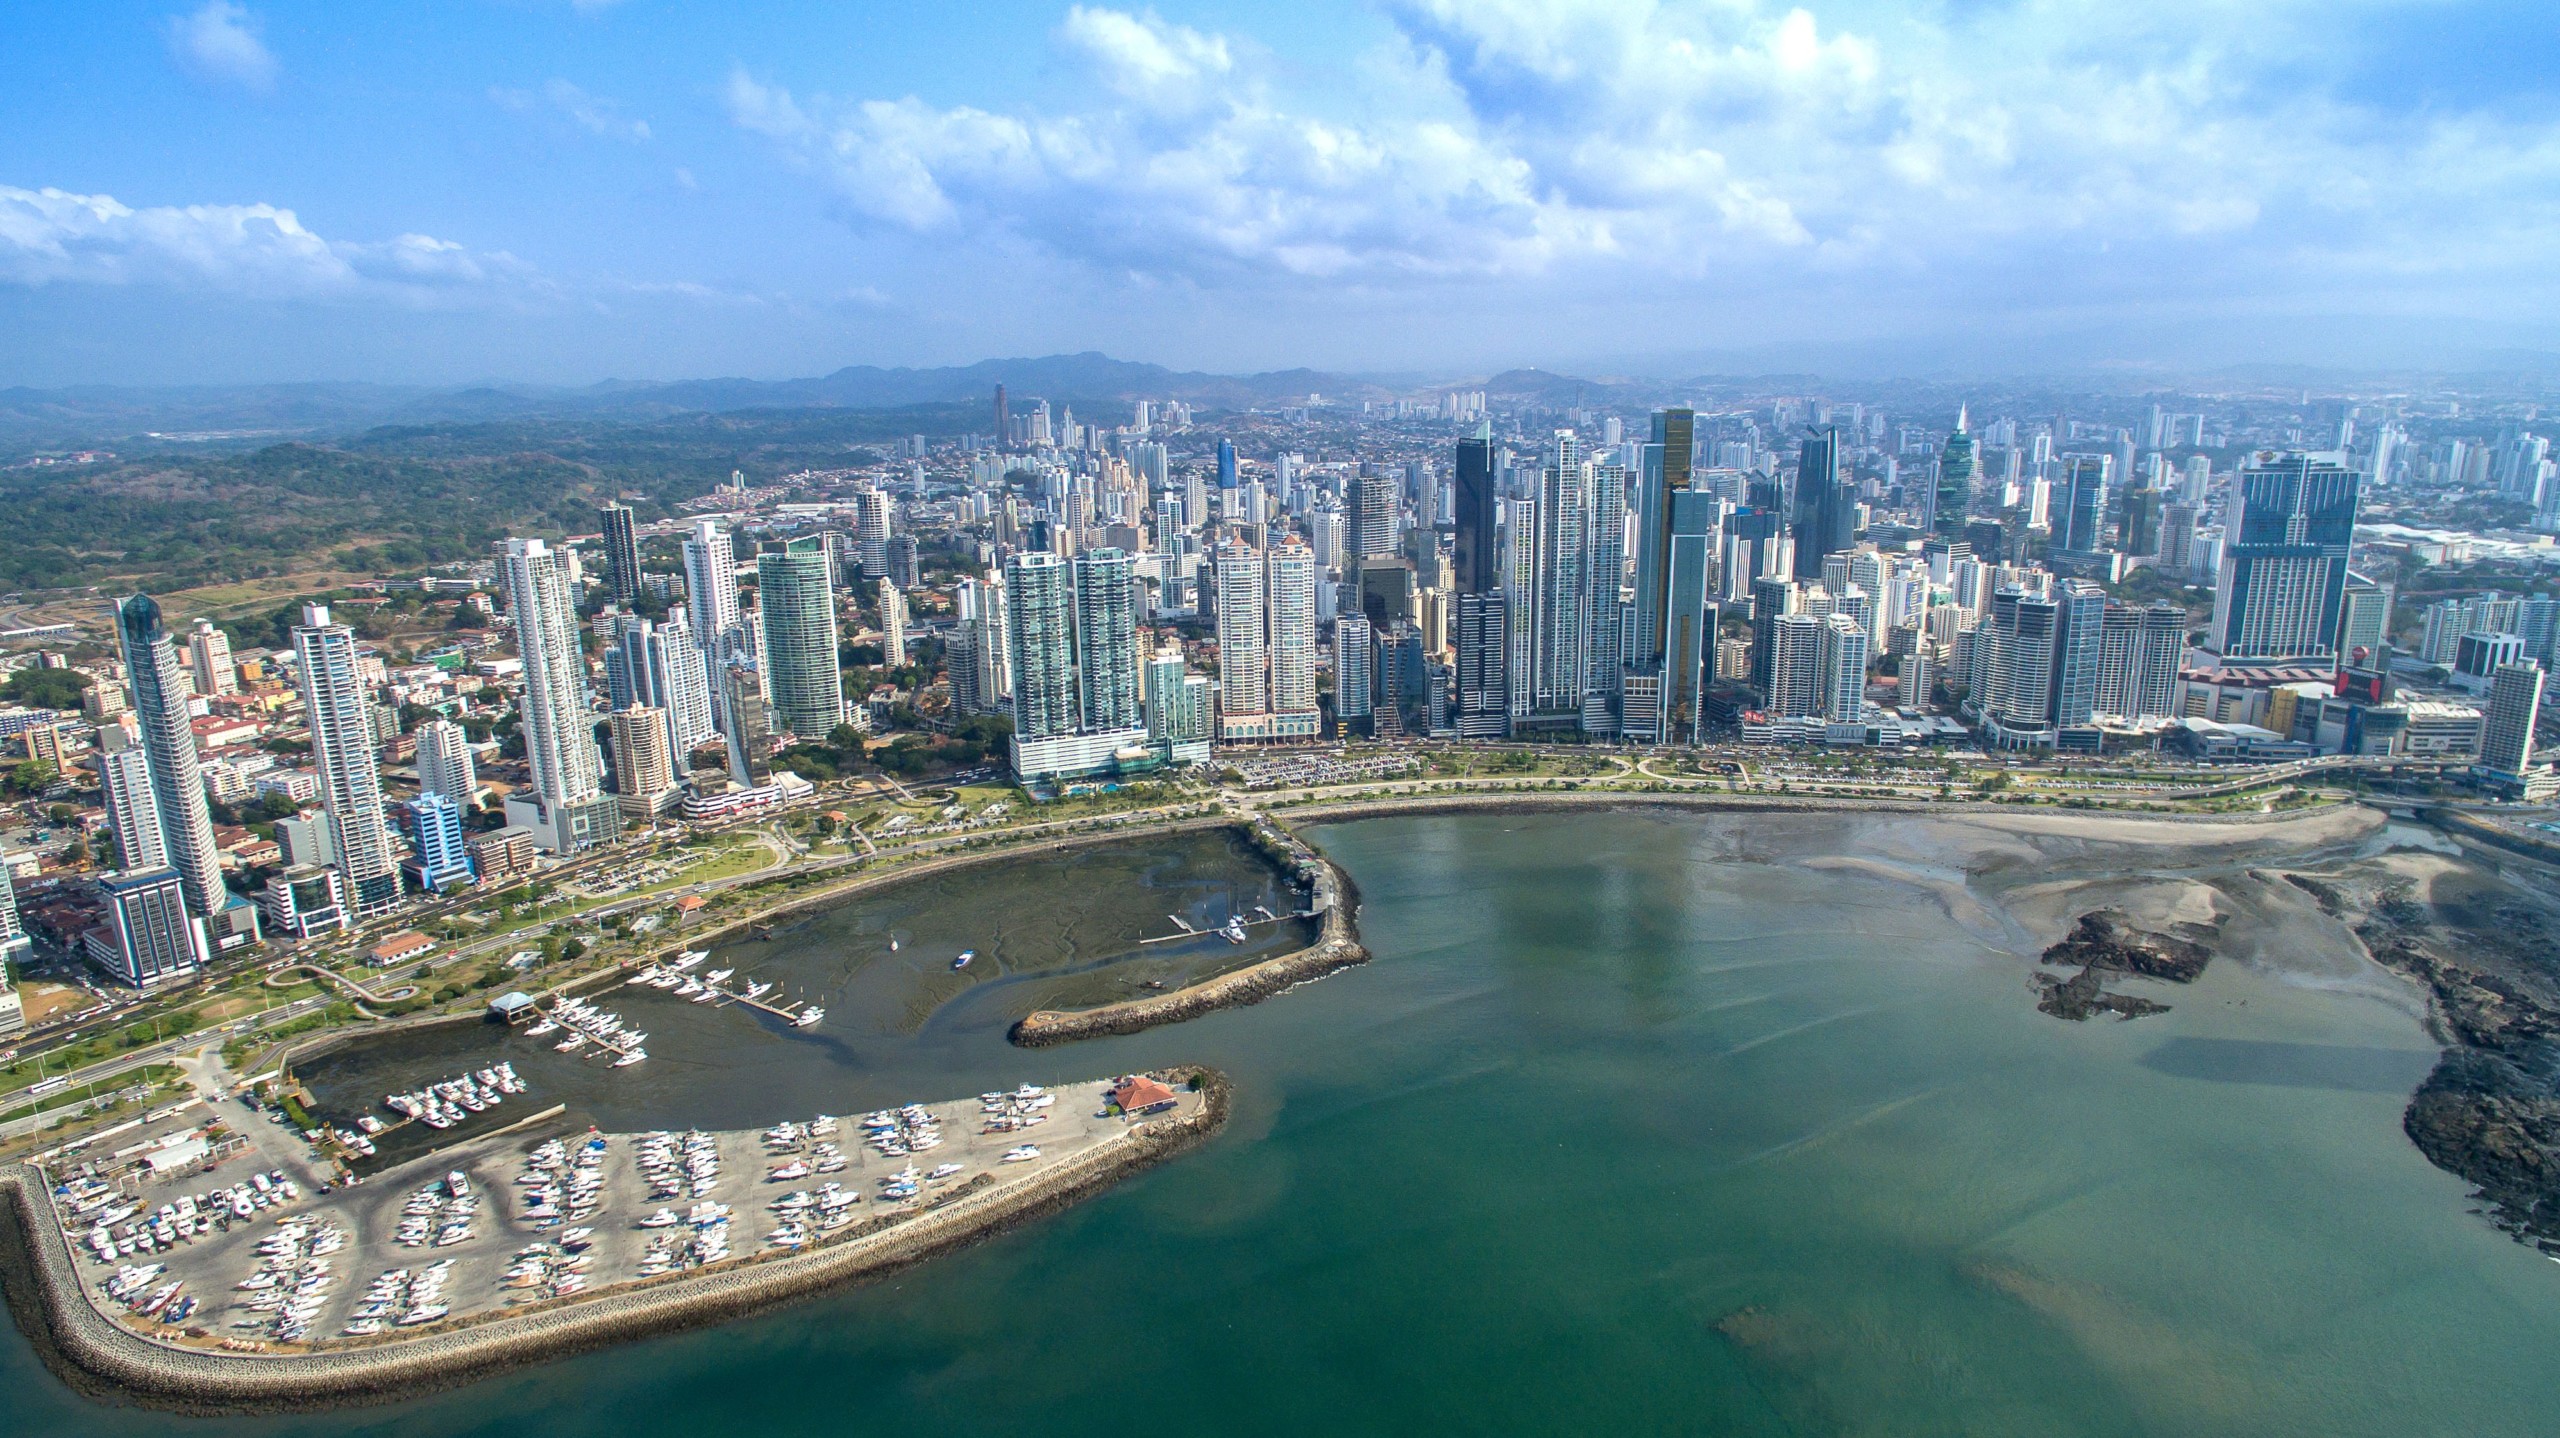 Of the millions of things to do in Panama City, Panama, here are 7 of the m...